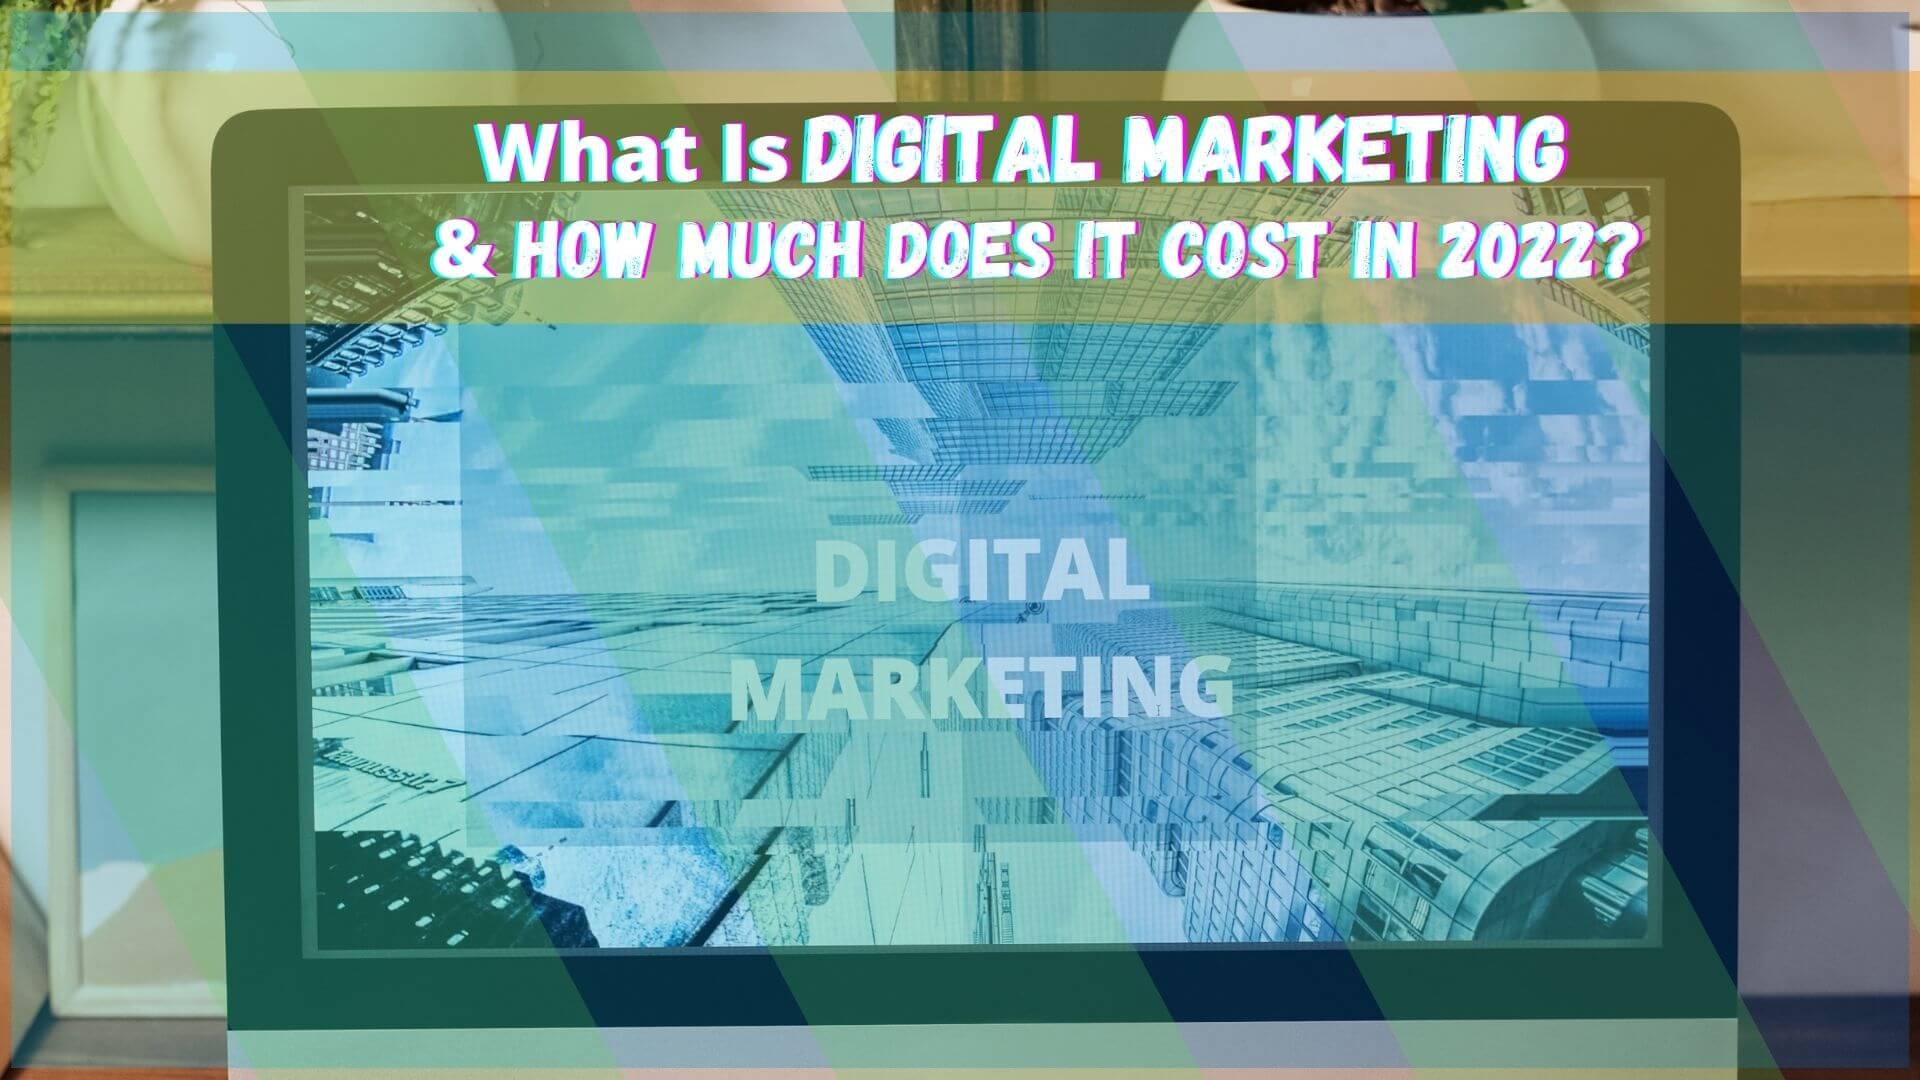 It's important to know the actual cost of digital marketing if you plan to improve your digital marketing services. Click here to know more.